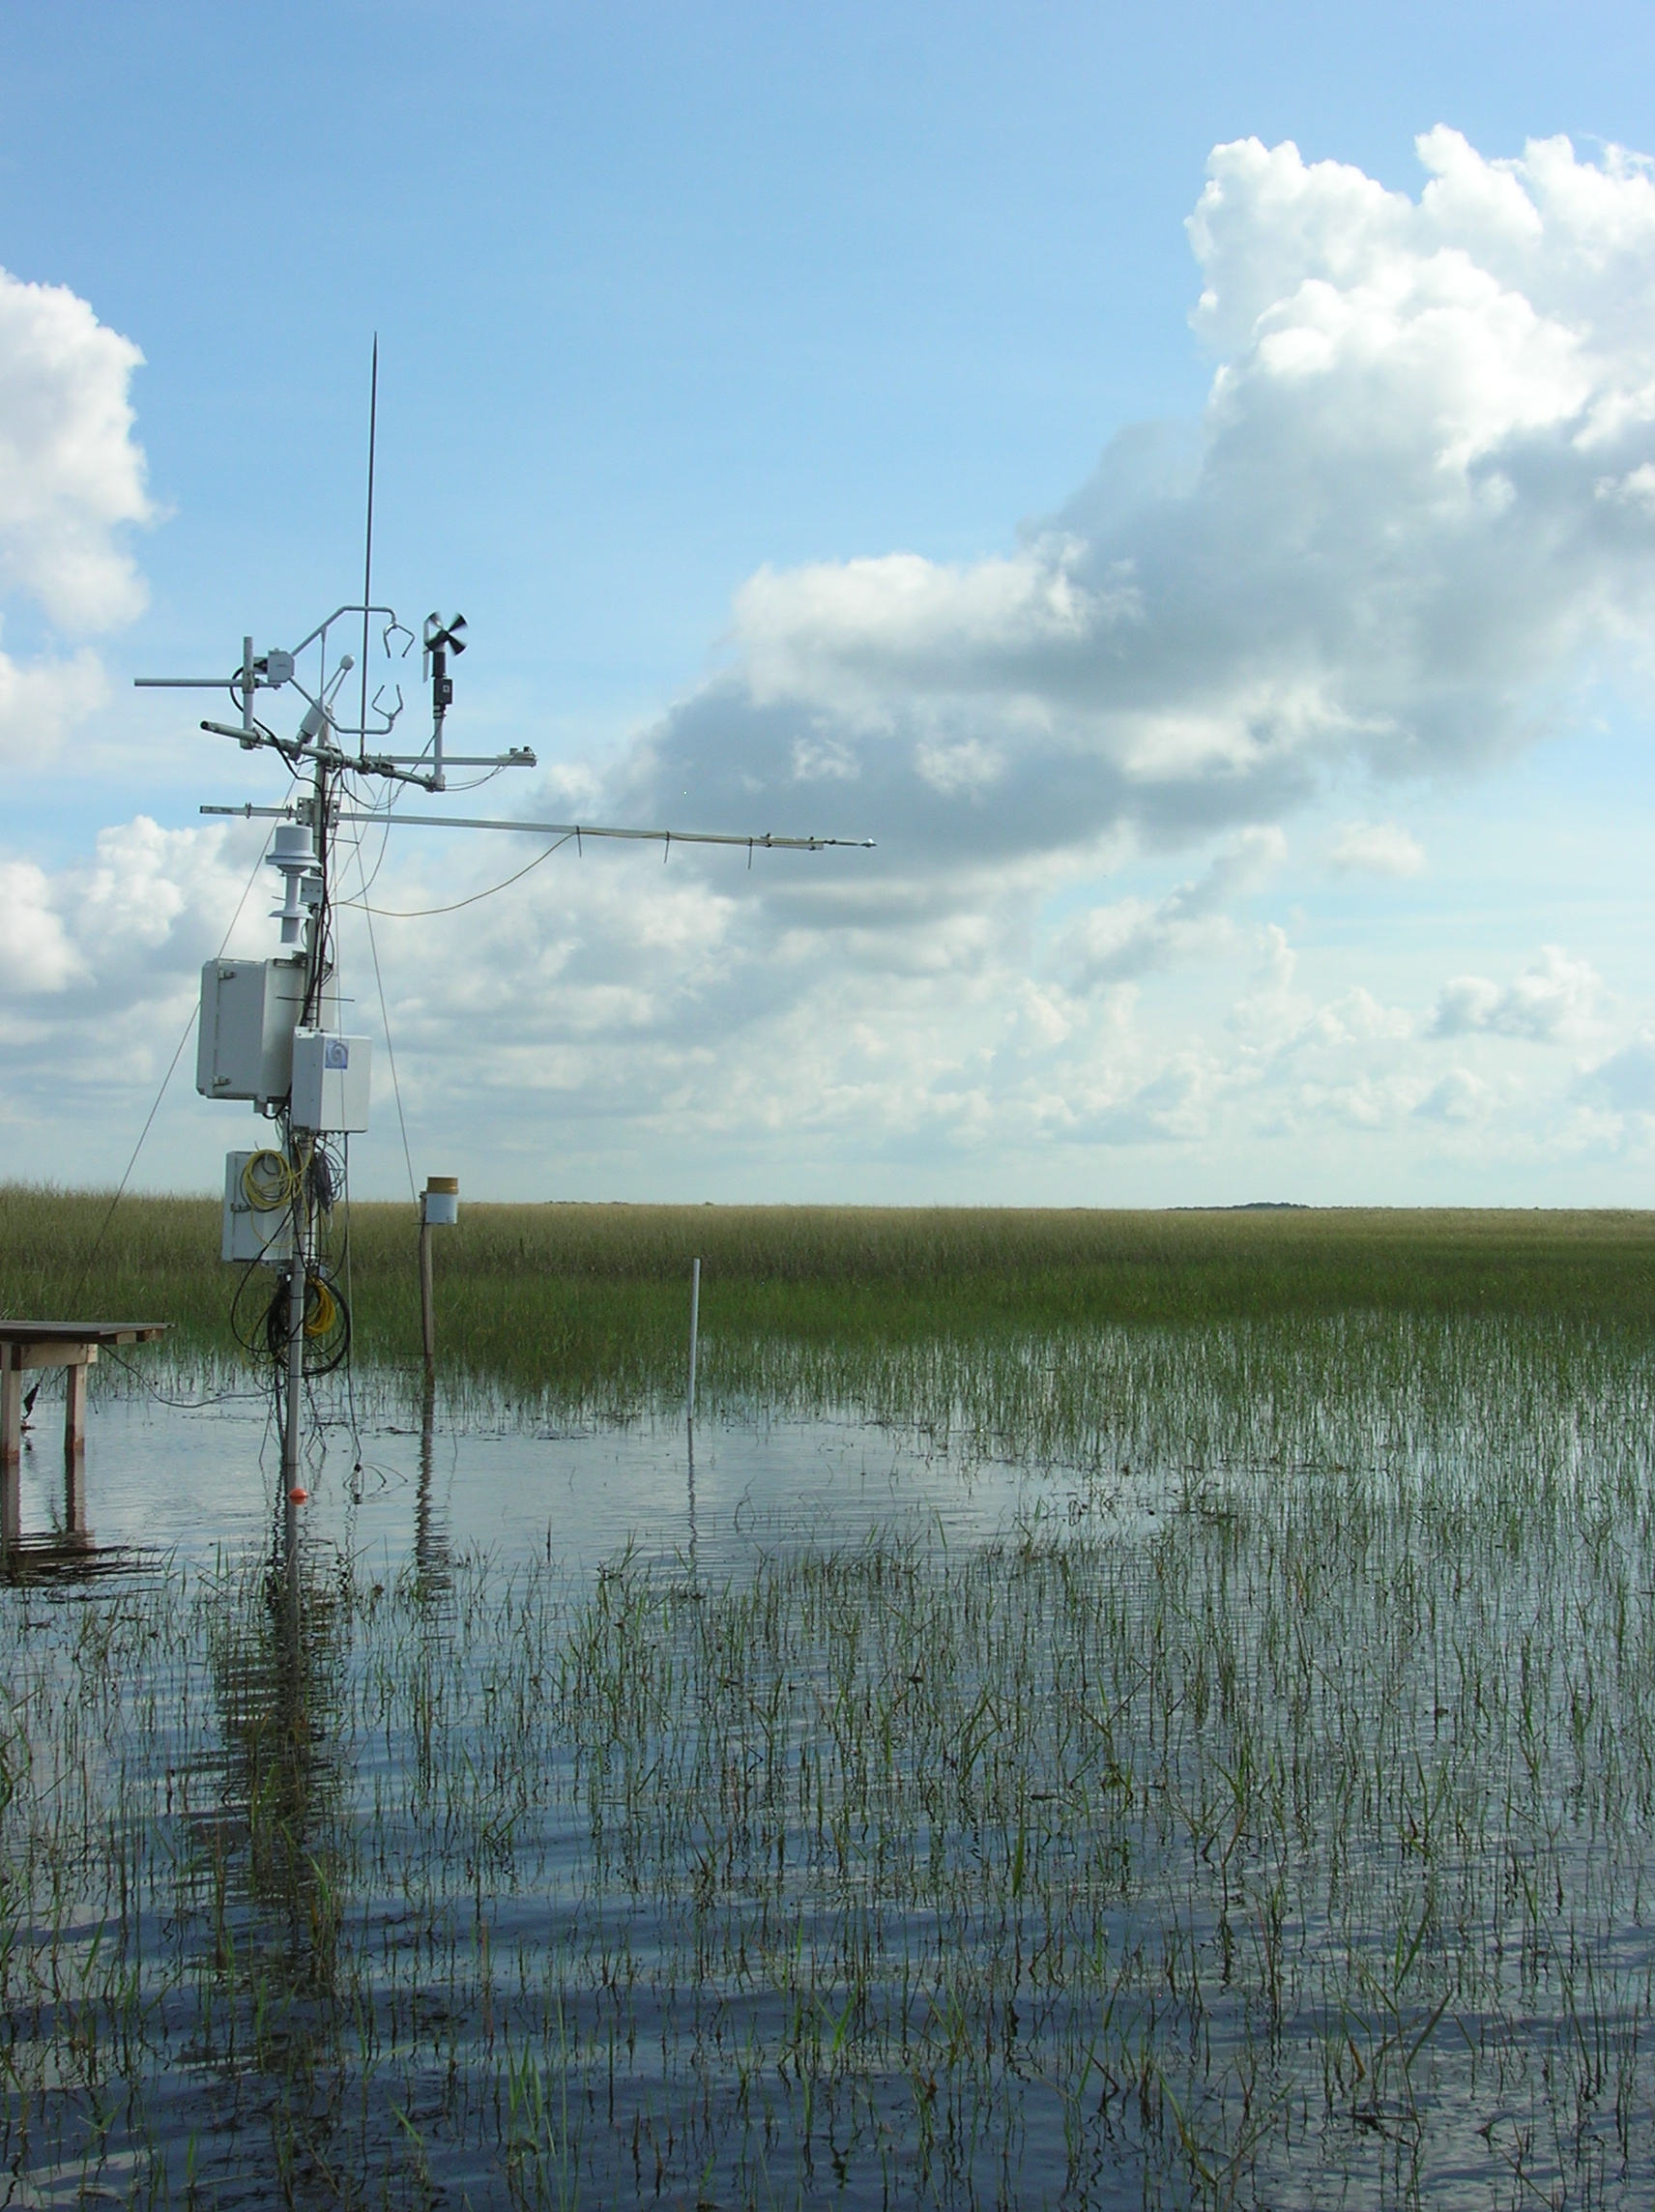 Eddy covariance and meteorological tower in a long-hydroperiod Everglades marsh during the height of the wet season, 2008 (at SRS-2 in Shark River Slough)